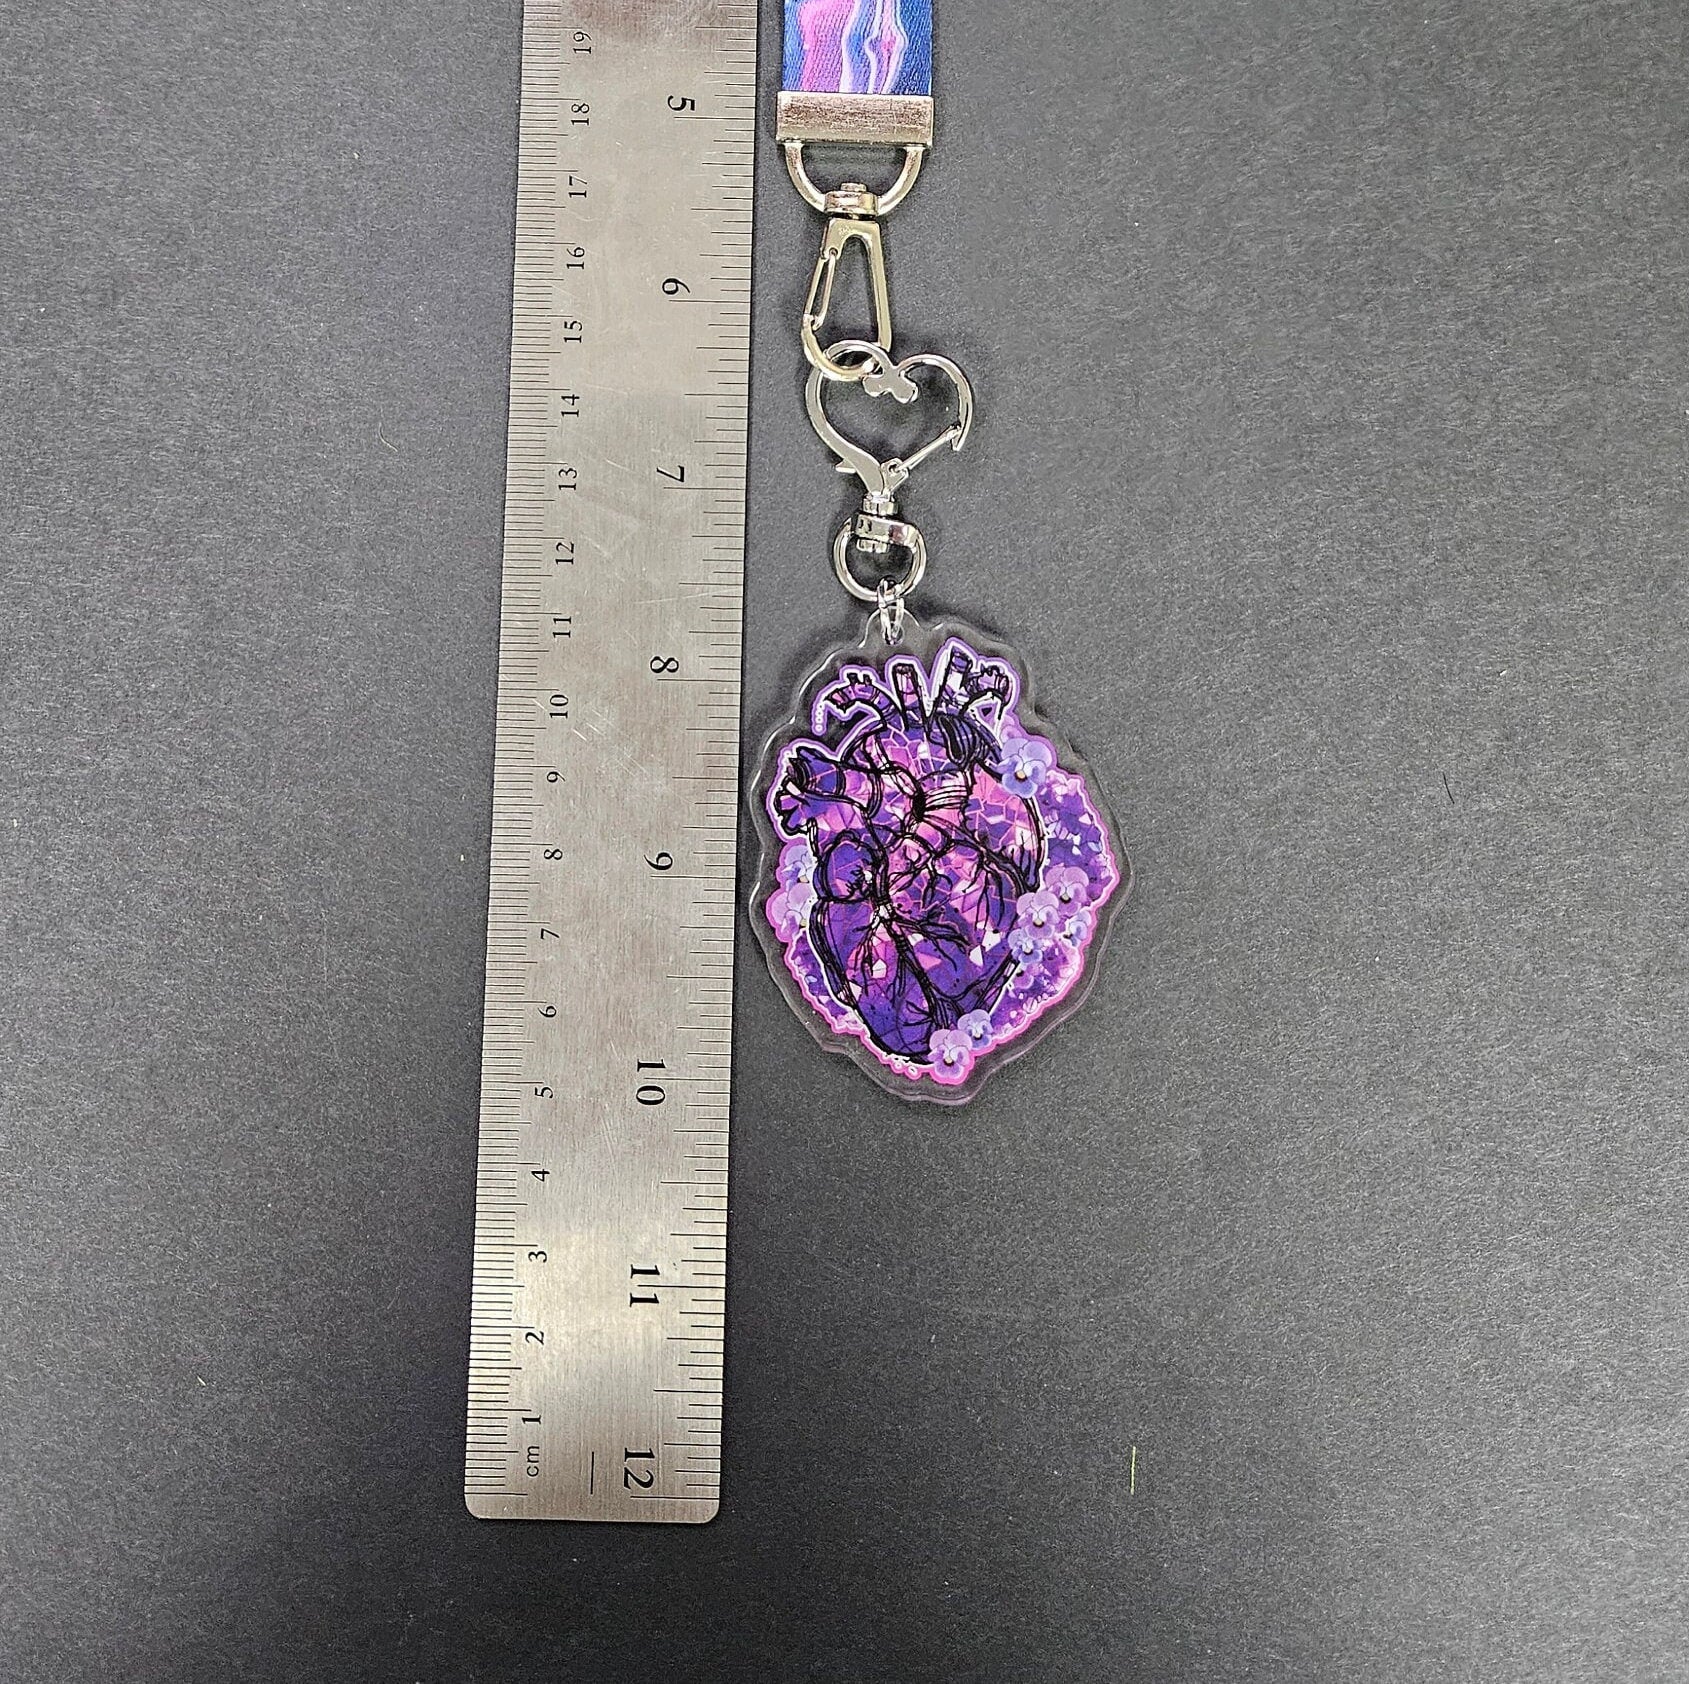 WRISTLET with Double Sided Charm: Amethyst Crystal Heart